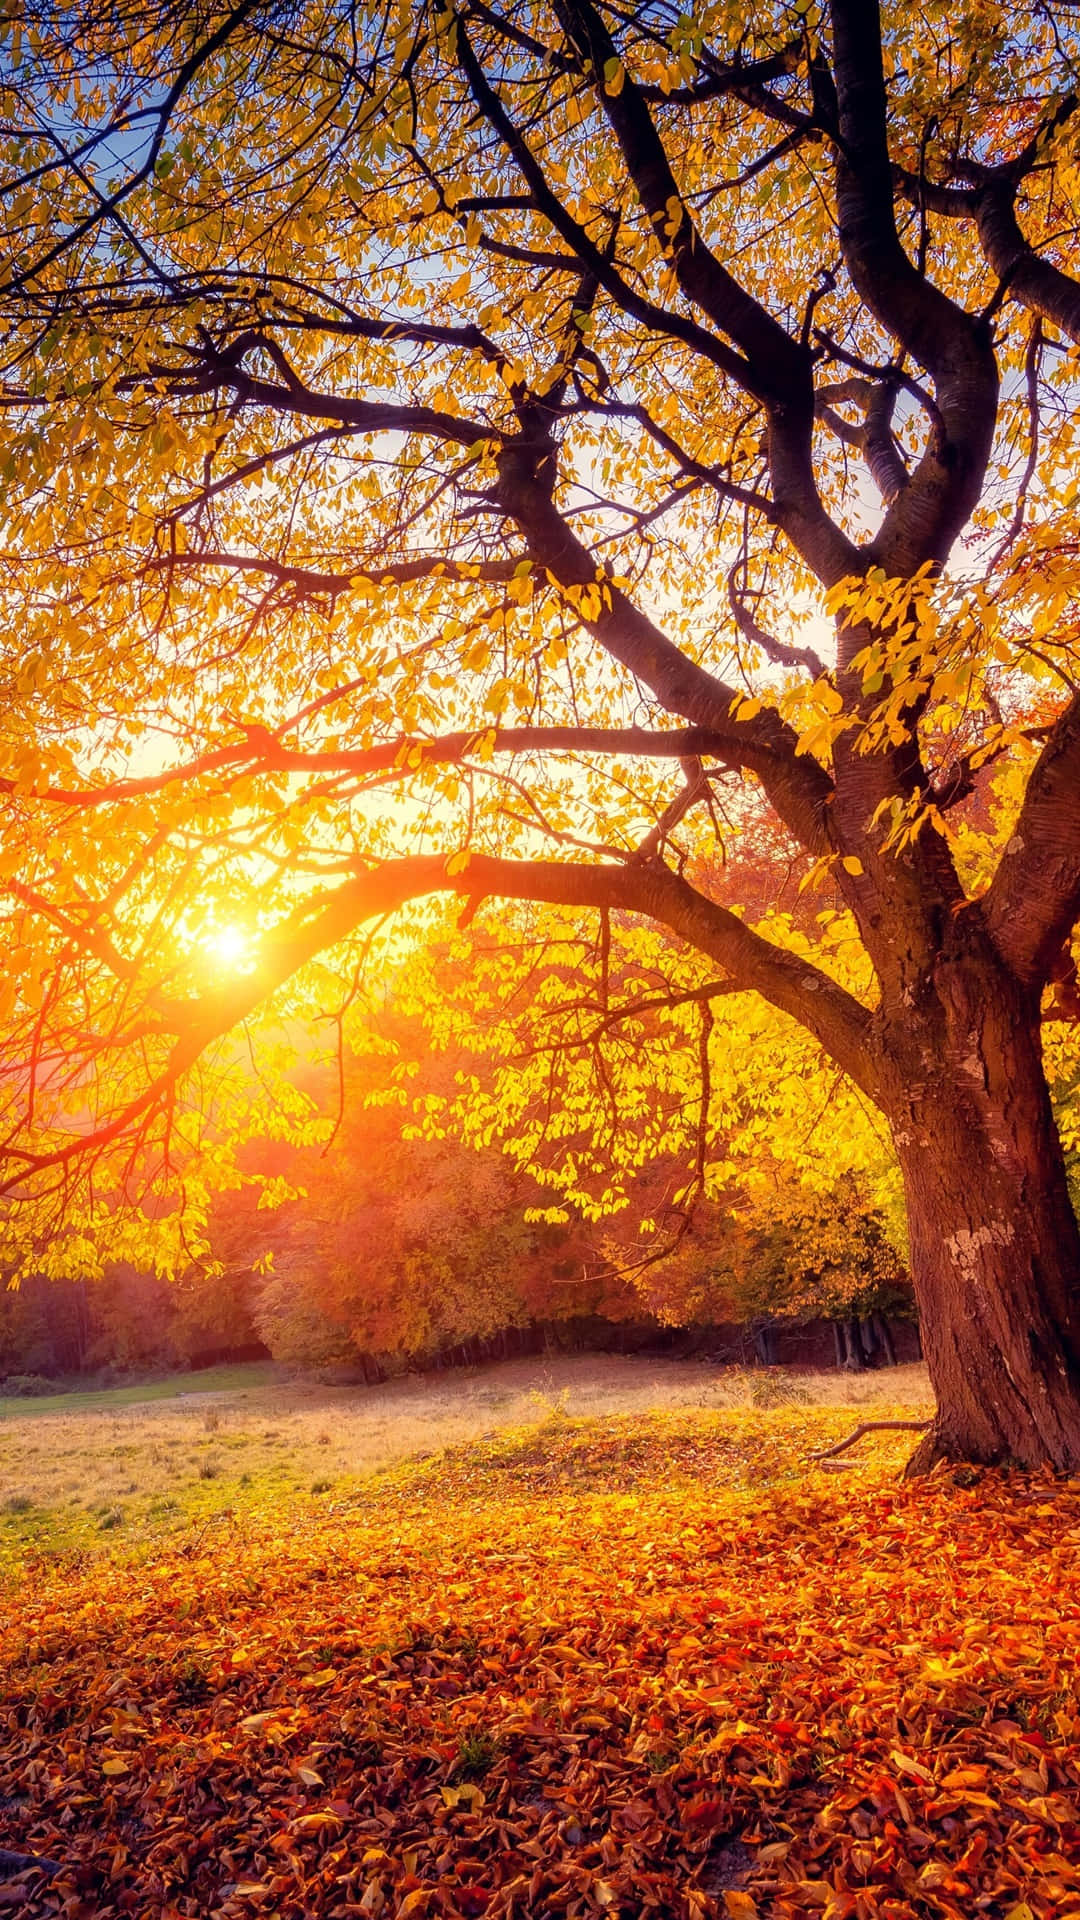 Enjoy the changing colors of Autumn with the Iphone 6 Plus Wallpaper